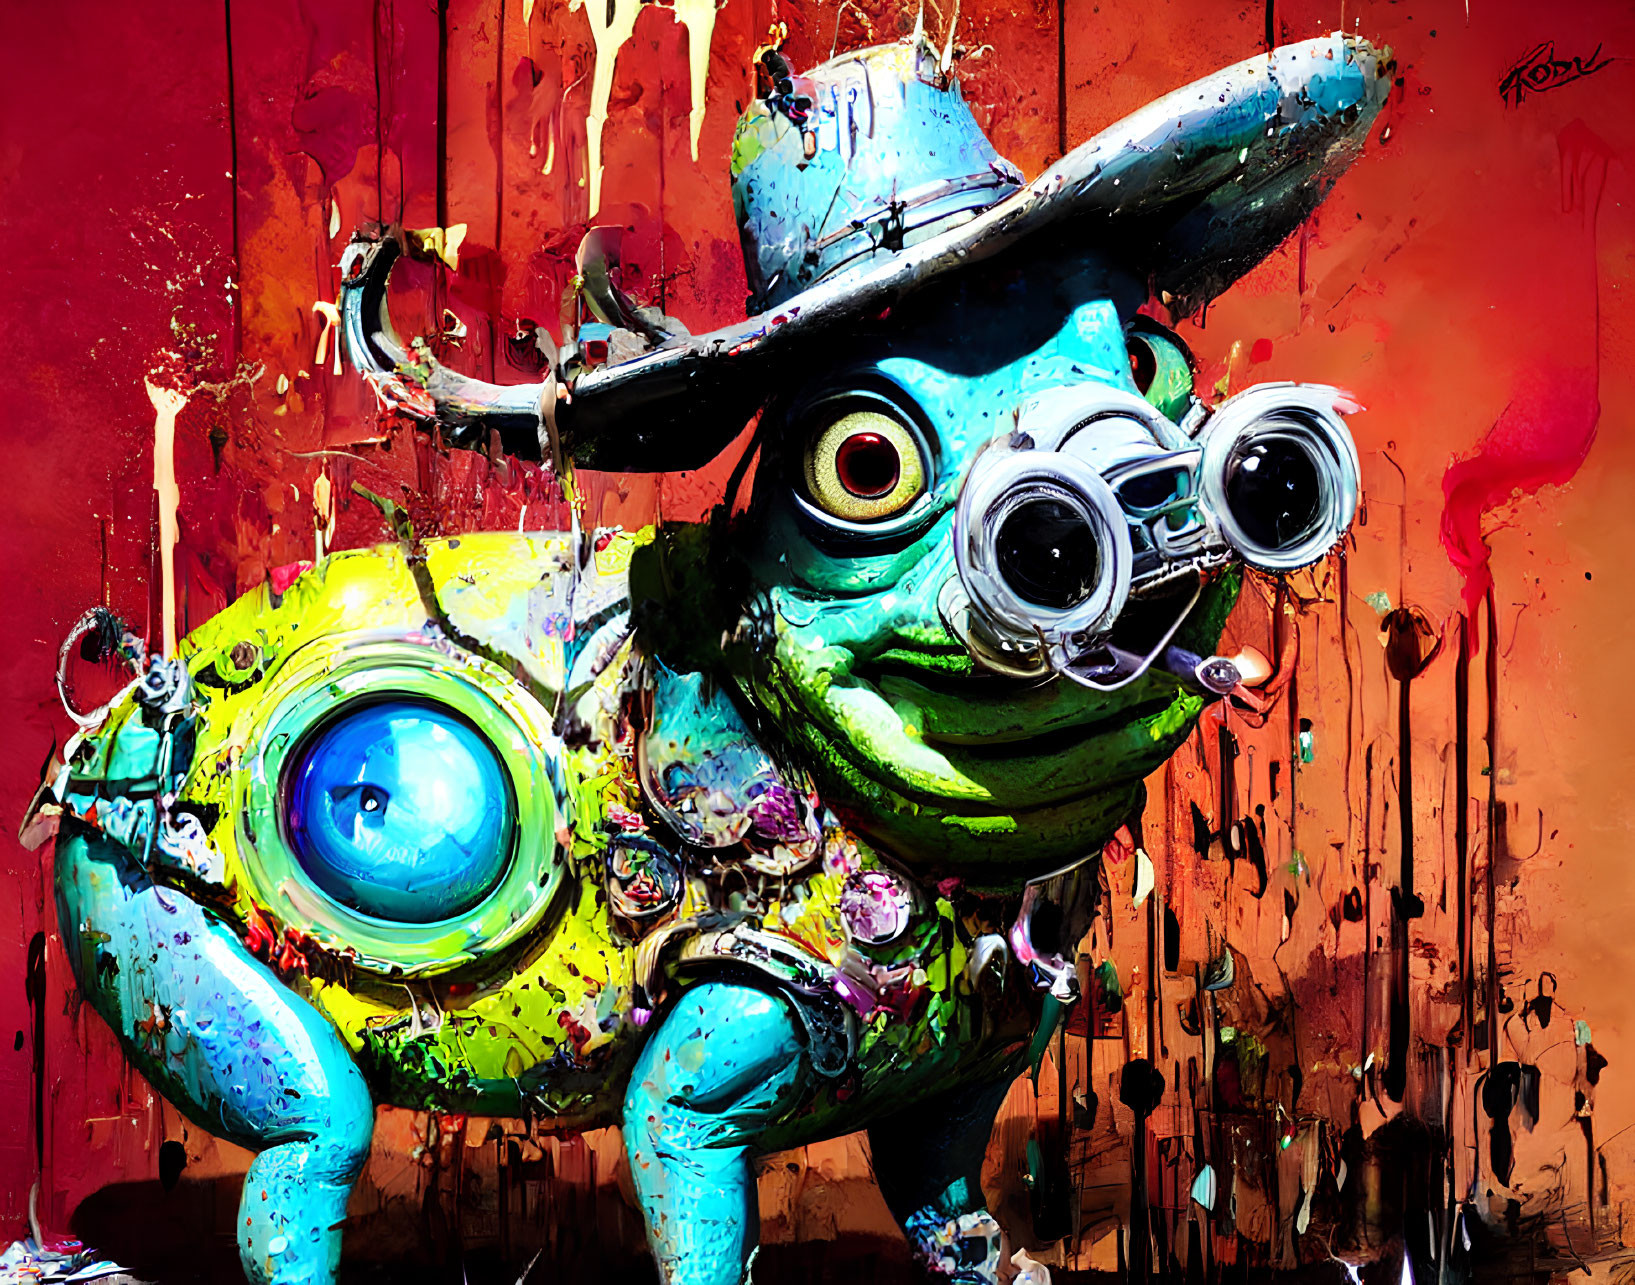 Colorful graffiti-style artwork: whimsical frog character with cowboy hat and goggles